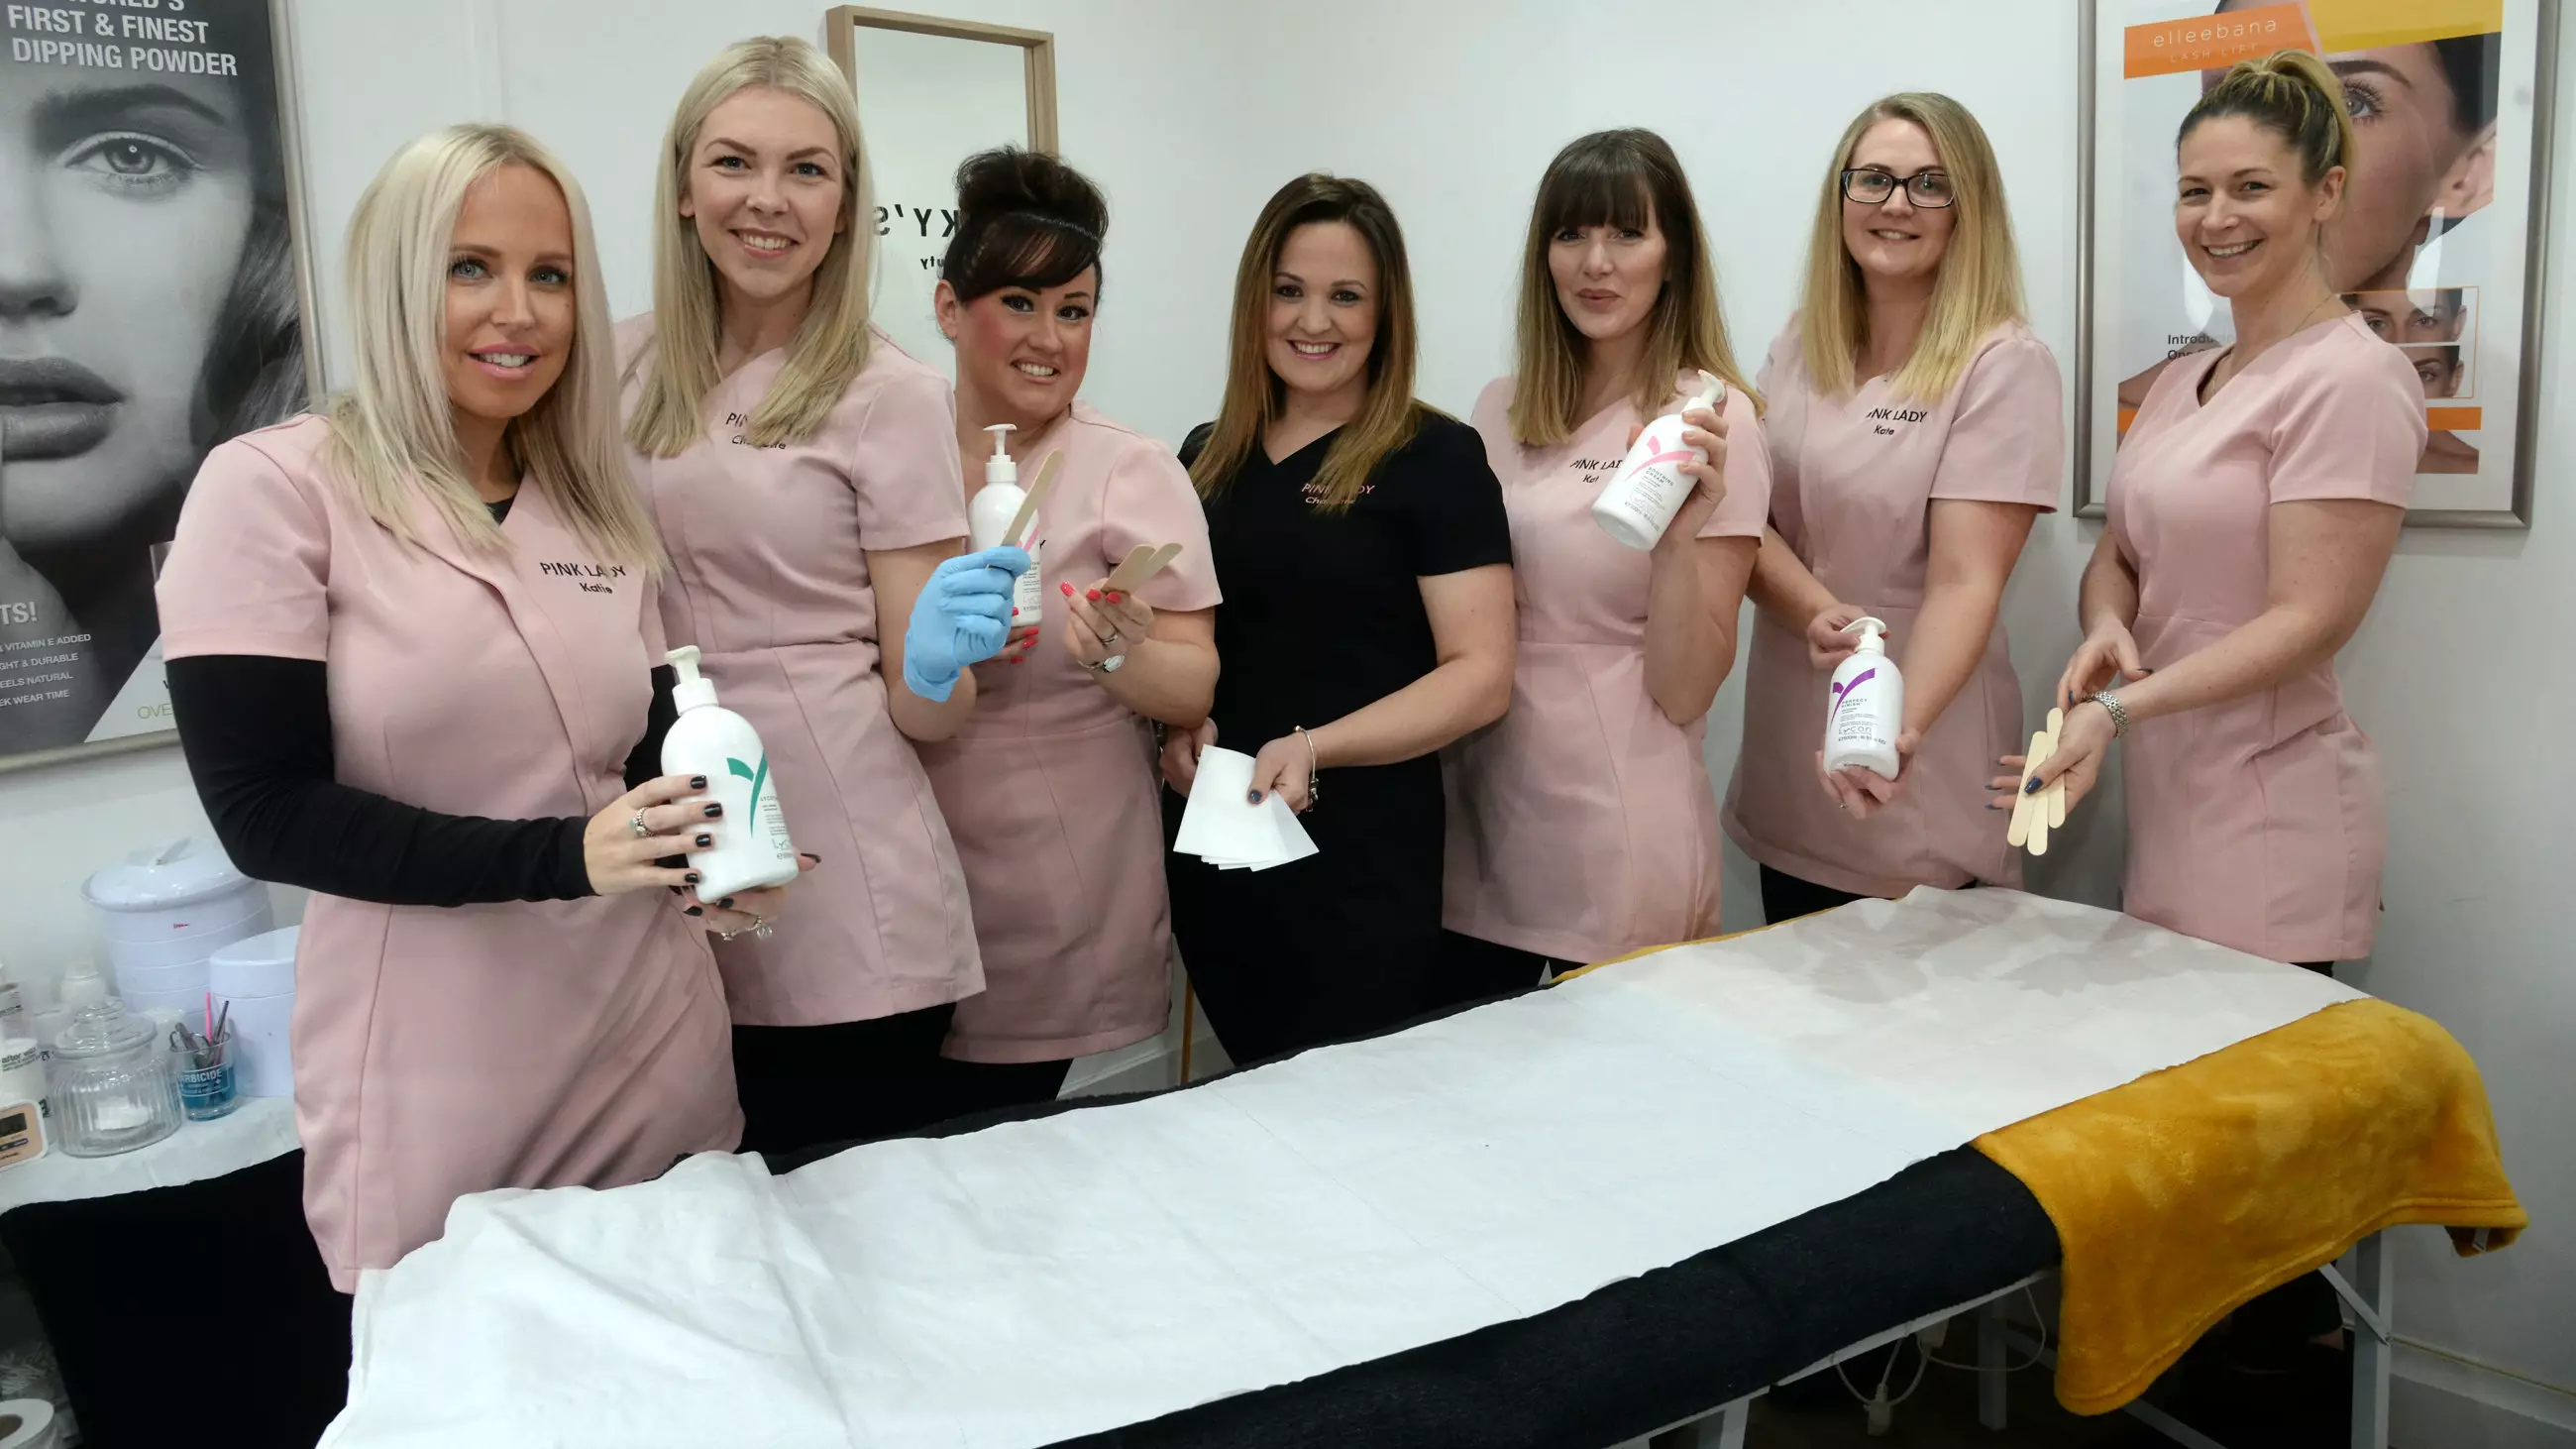 Beauty Salons Are Offering Free Bikini Waxes For Women Who Book Their Smear Test